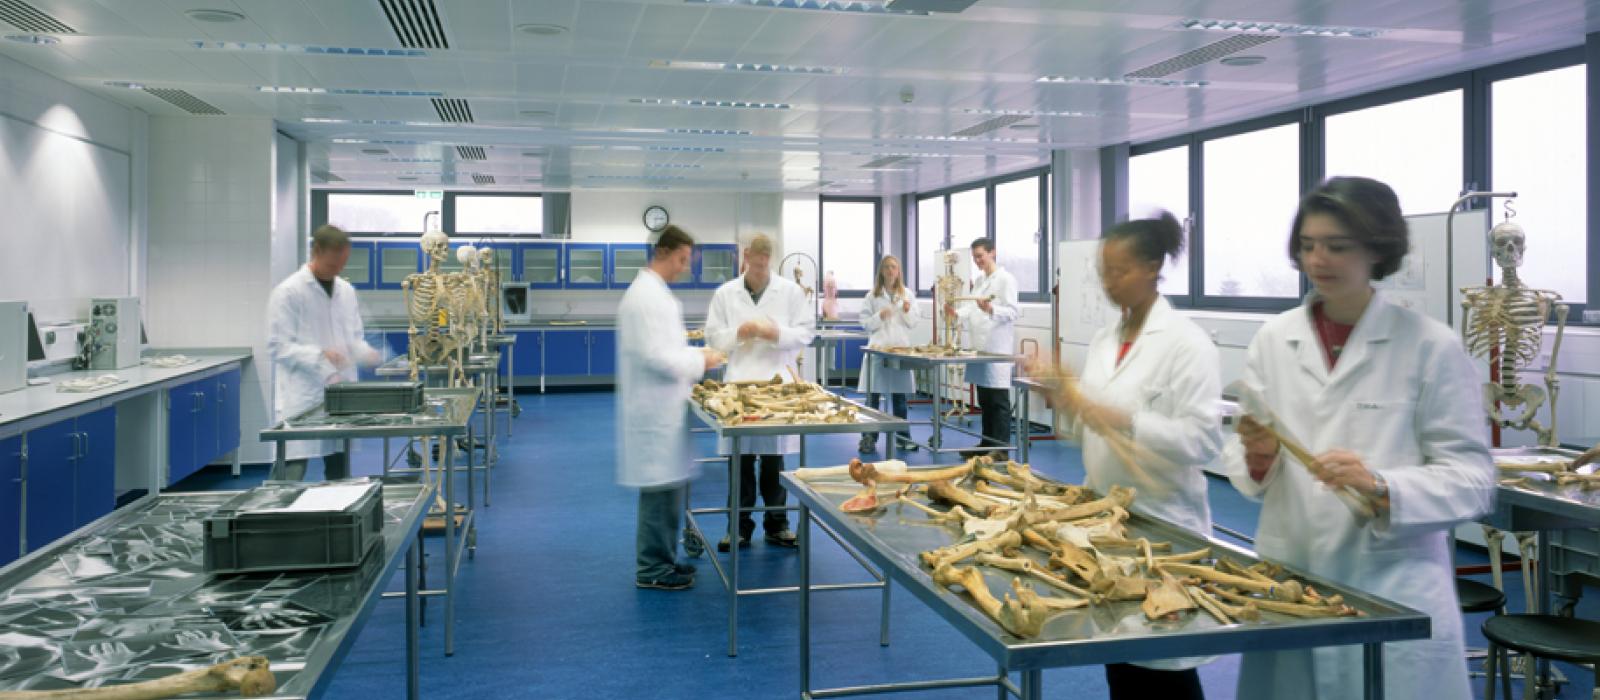 Dissecting Room, Medical Sciences Teaching Centre